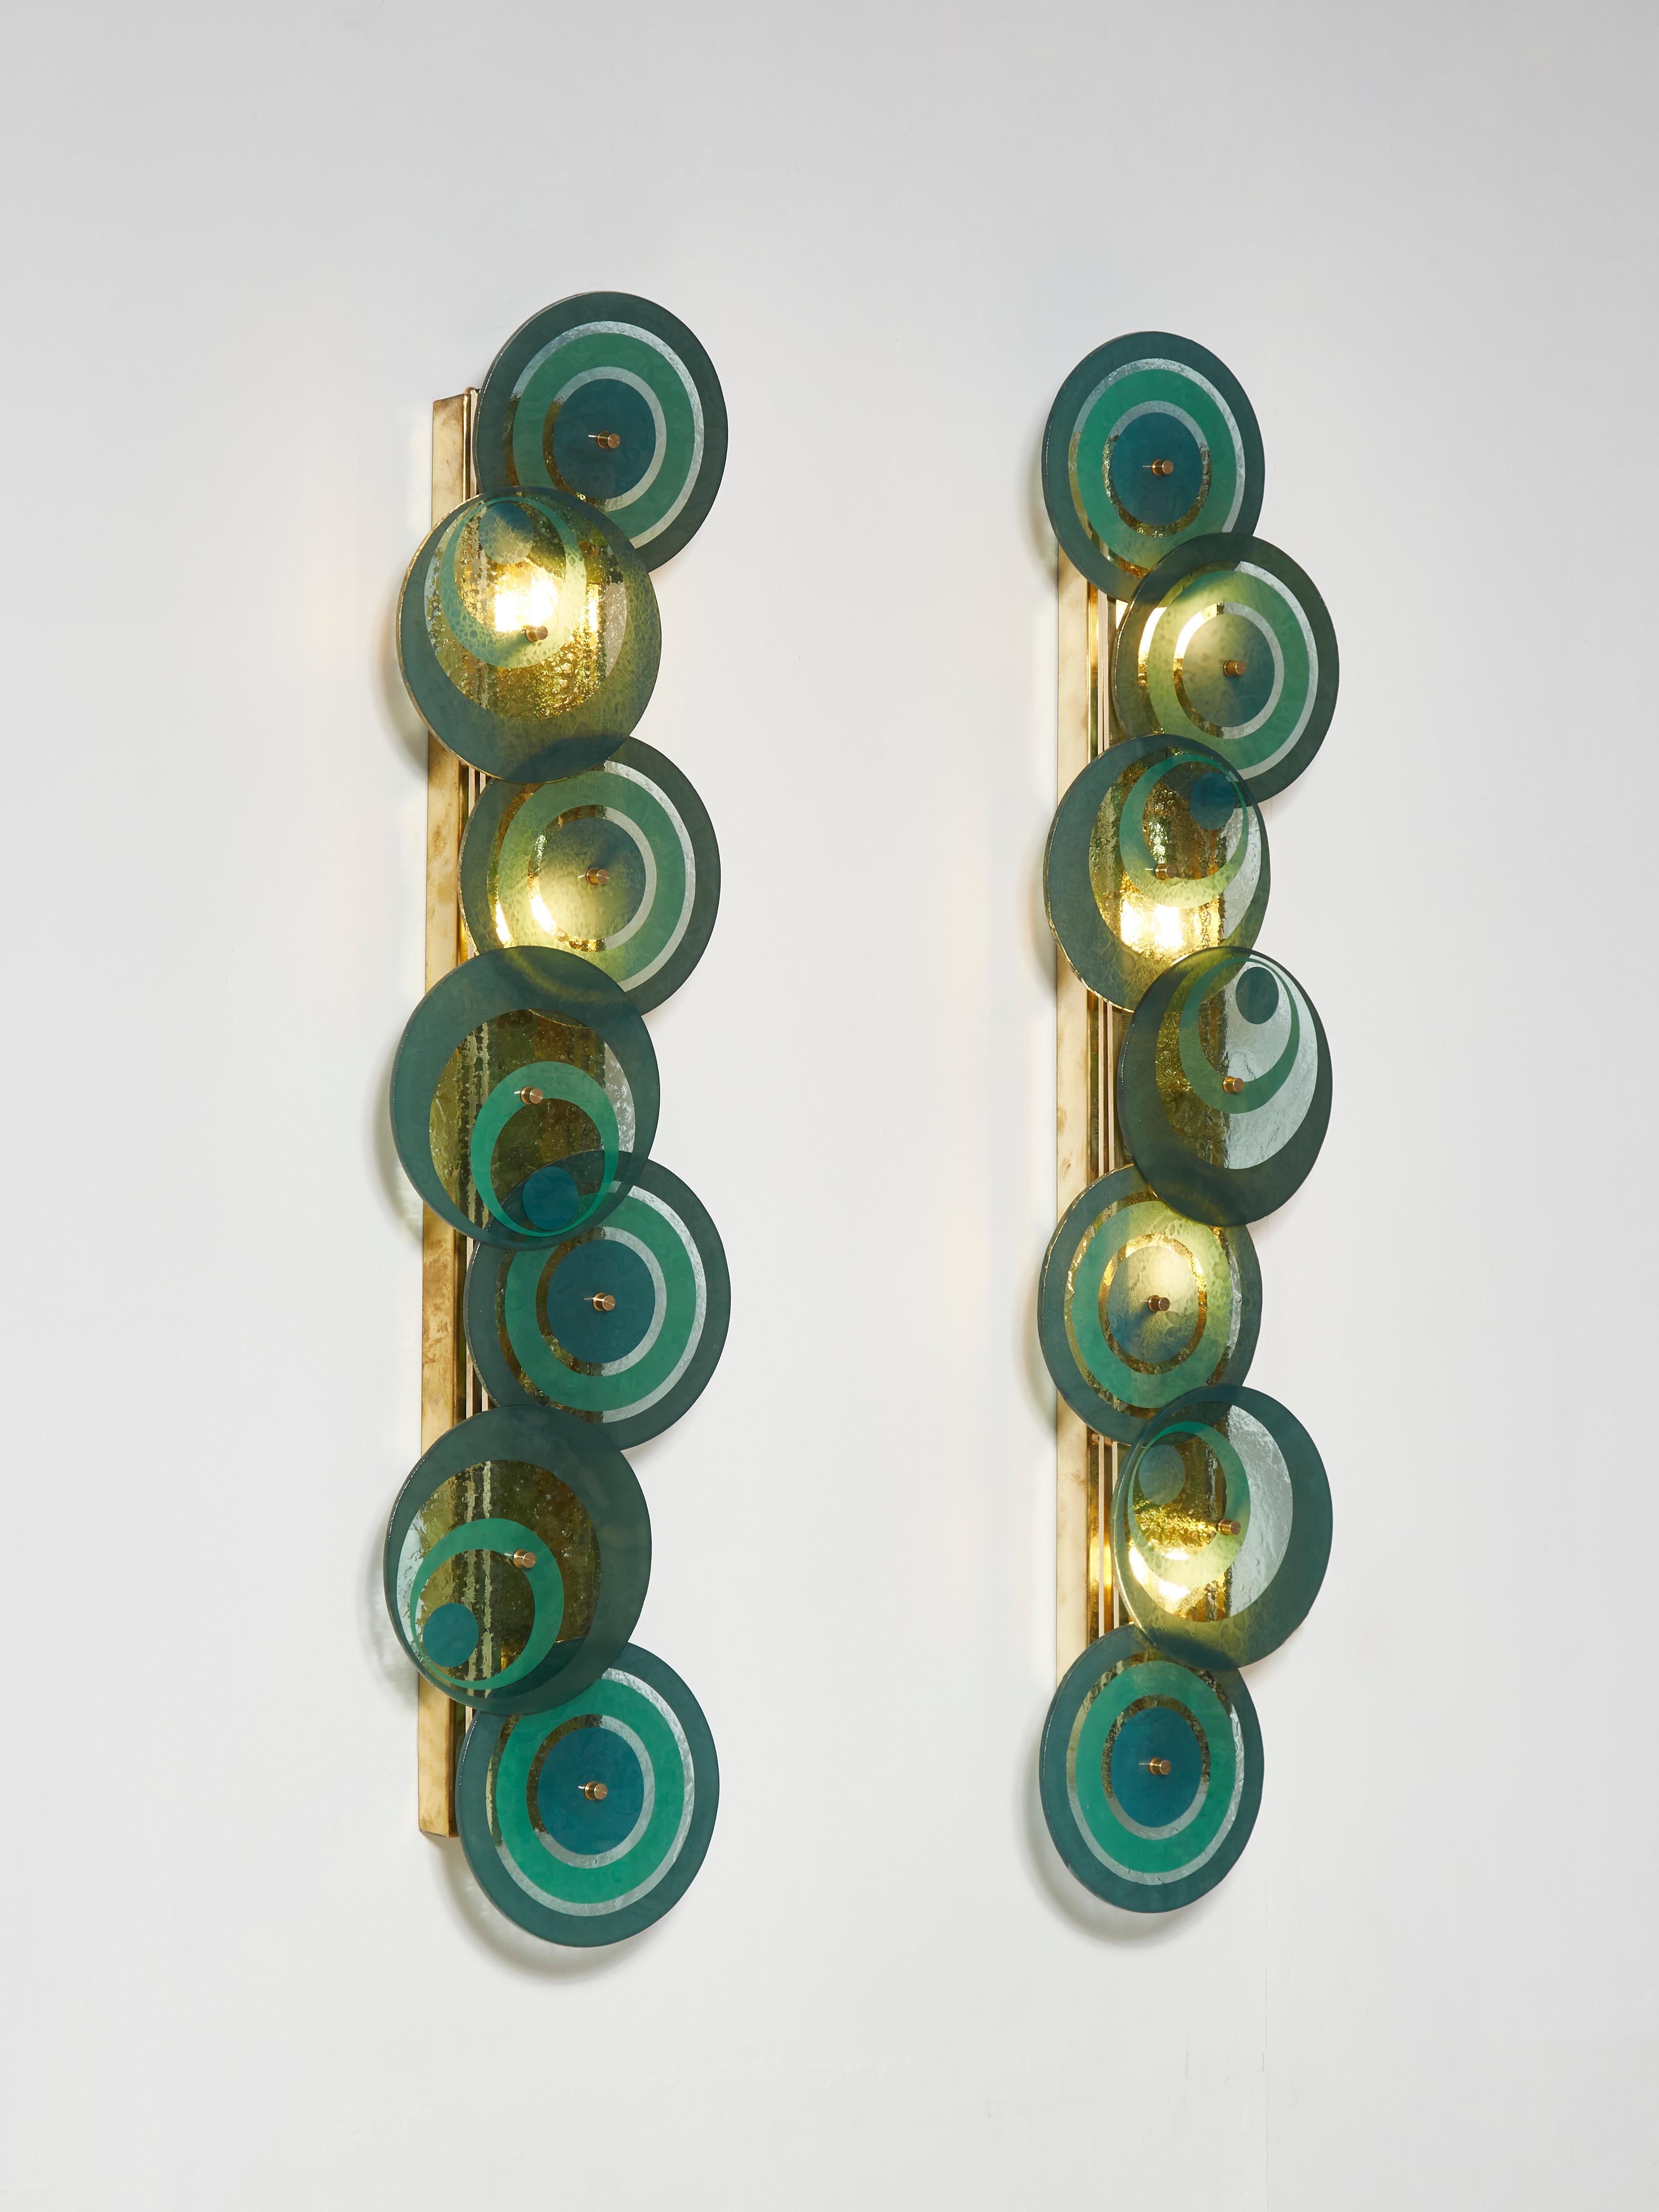 Stunning pair of wall sconces in brass with tainted discs in Murano glass. 4 Light bulbs.
Creation by Studio Glustin.
 